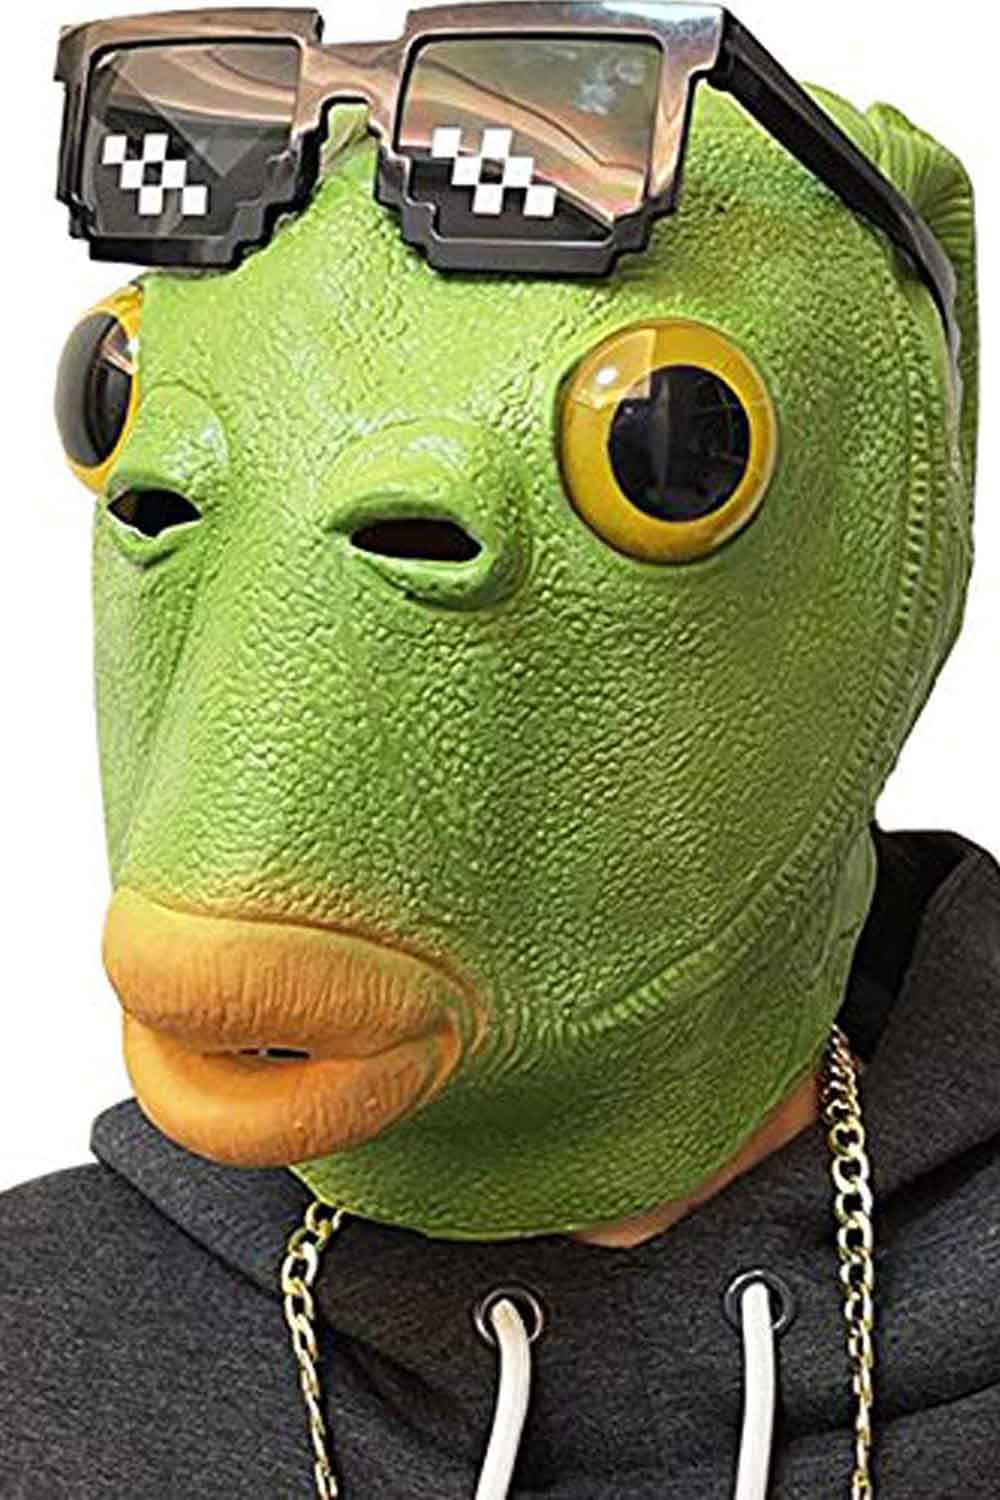 Green Fish Head Mask for Adults